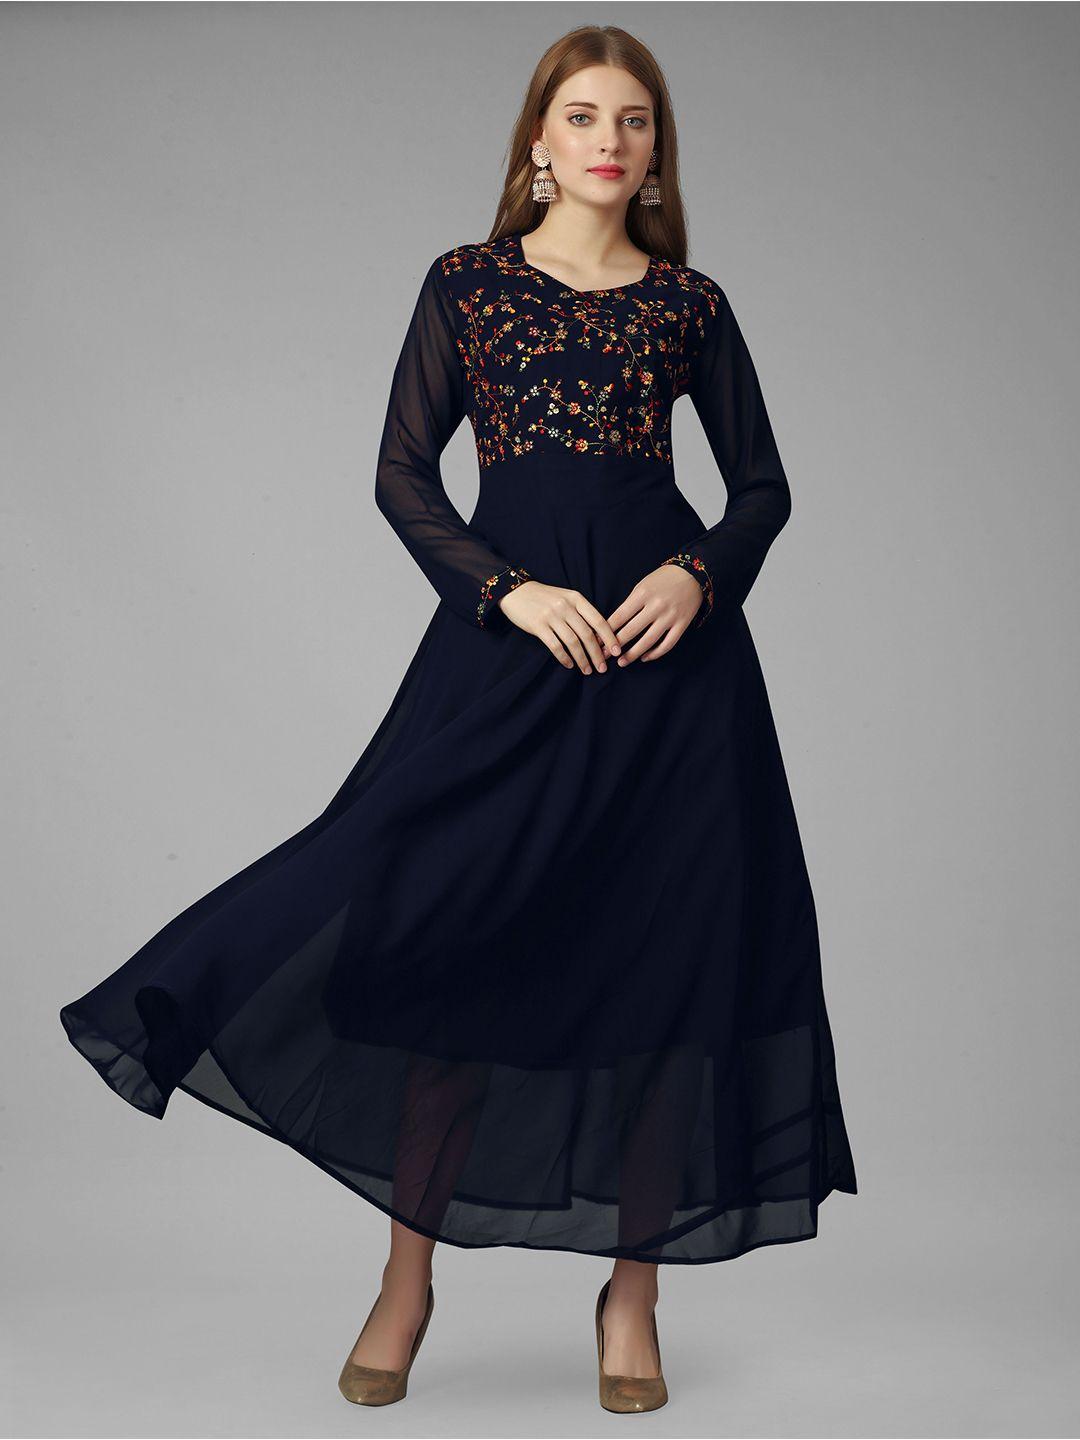 sidyal floral embroidered v neck long sleeves fit & flare dress